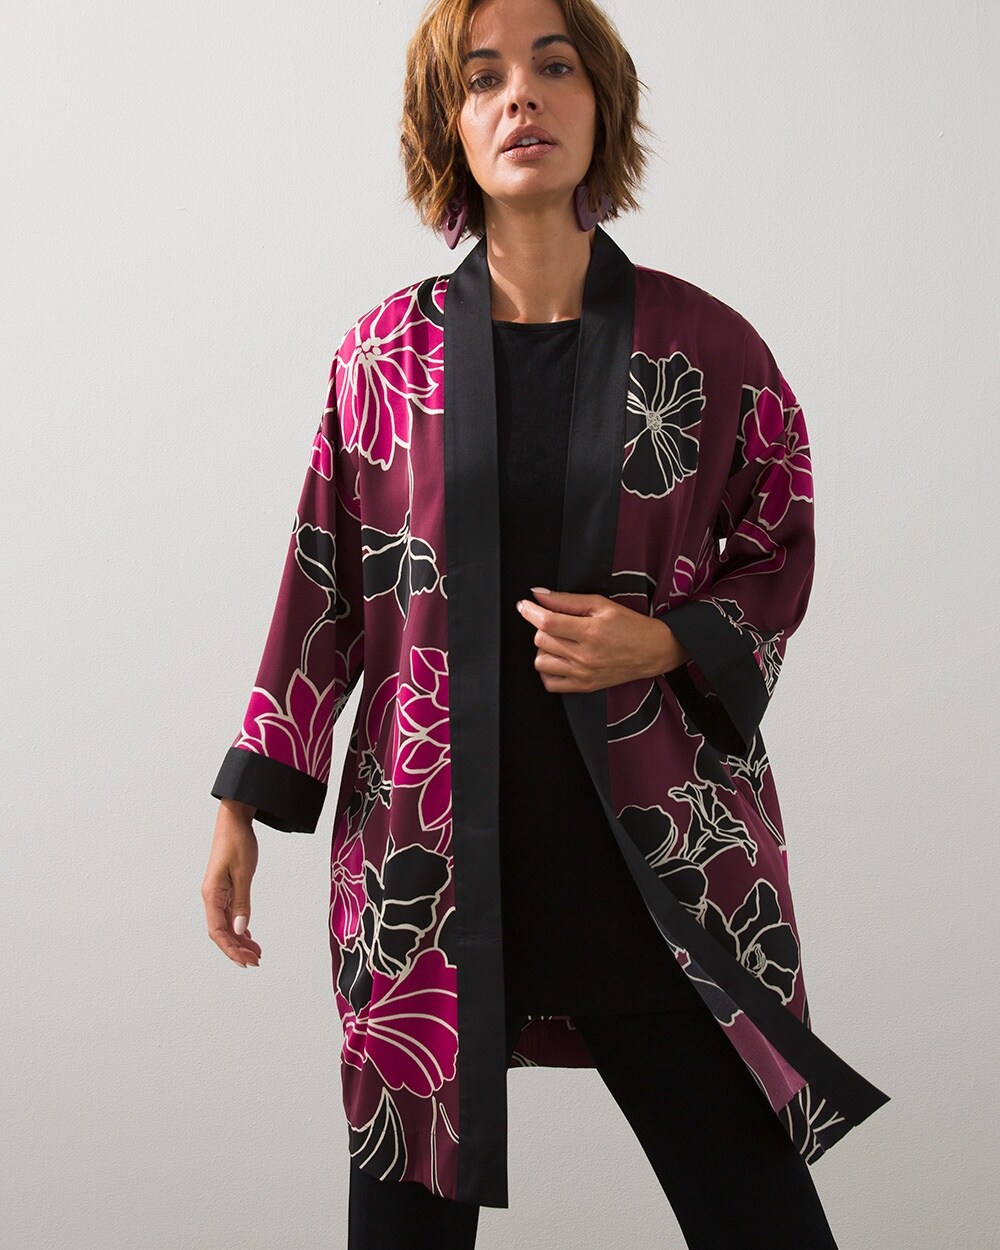 Travelers Collection Print Kimono video preview image, click to start video